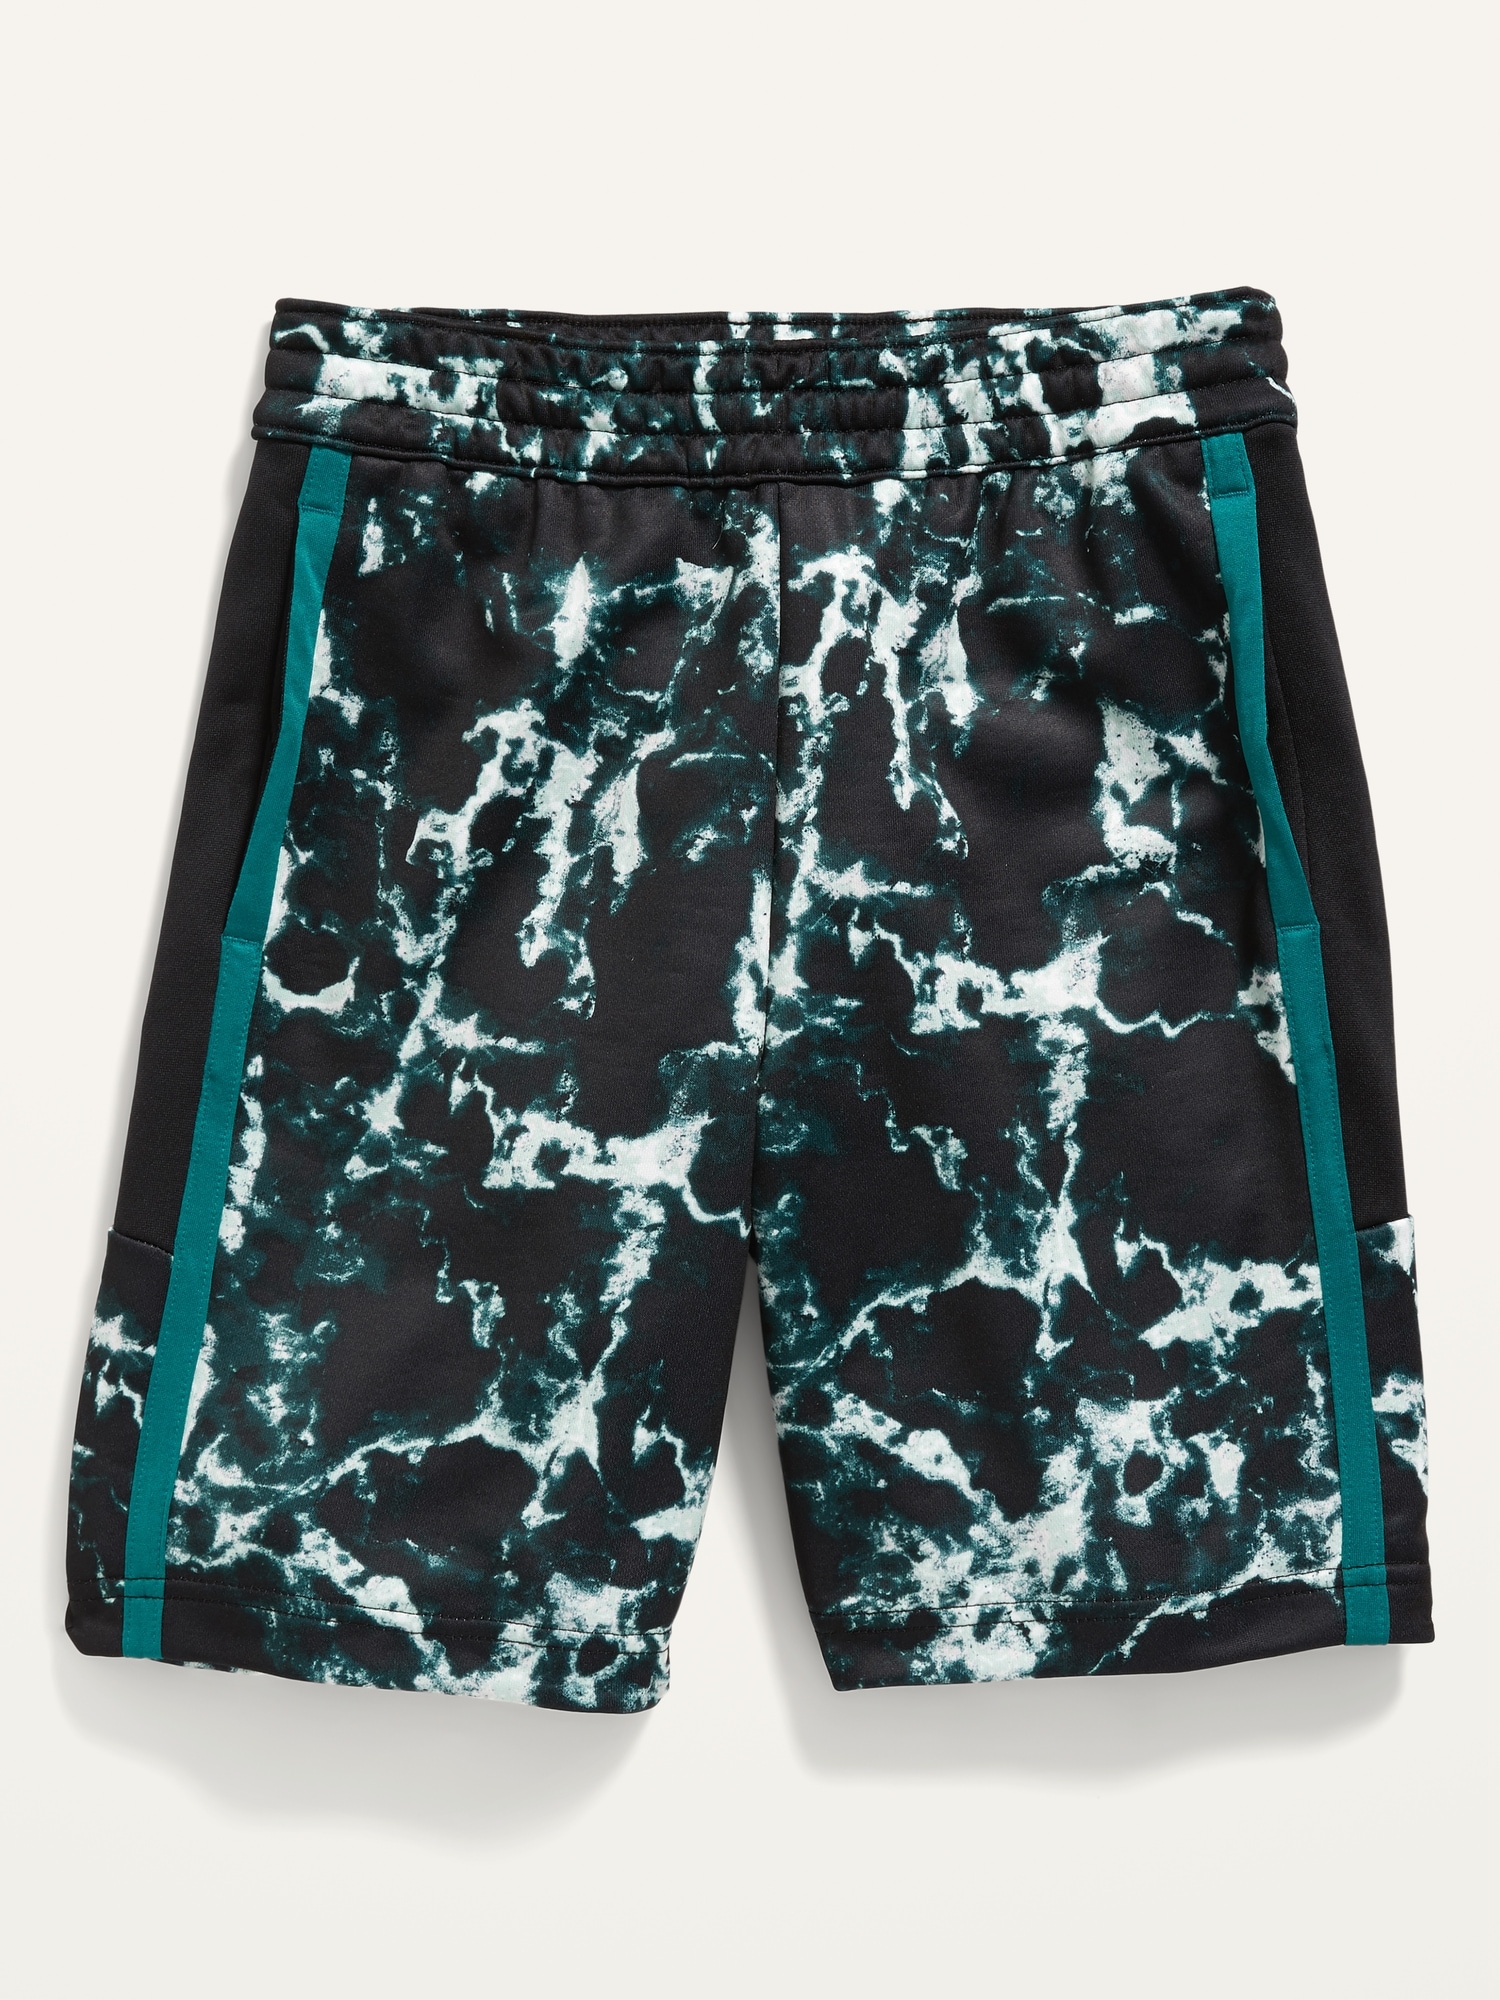 Go-Dry French Terry Performance Shorts for Boys